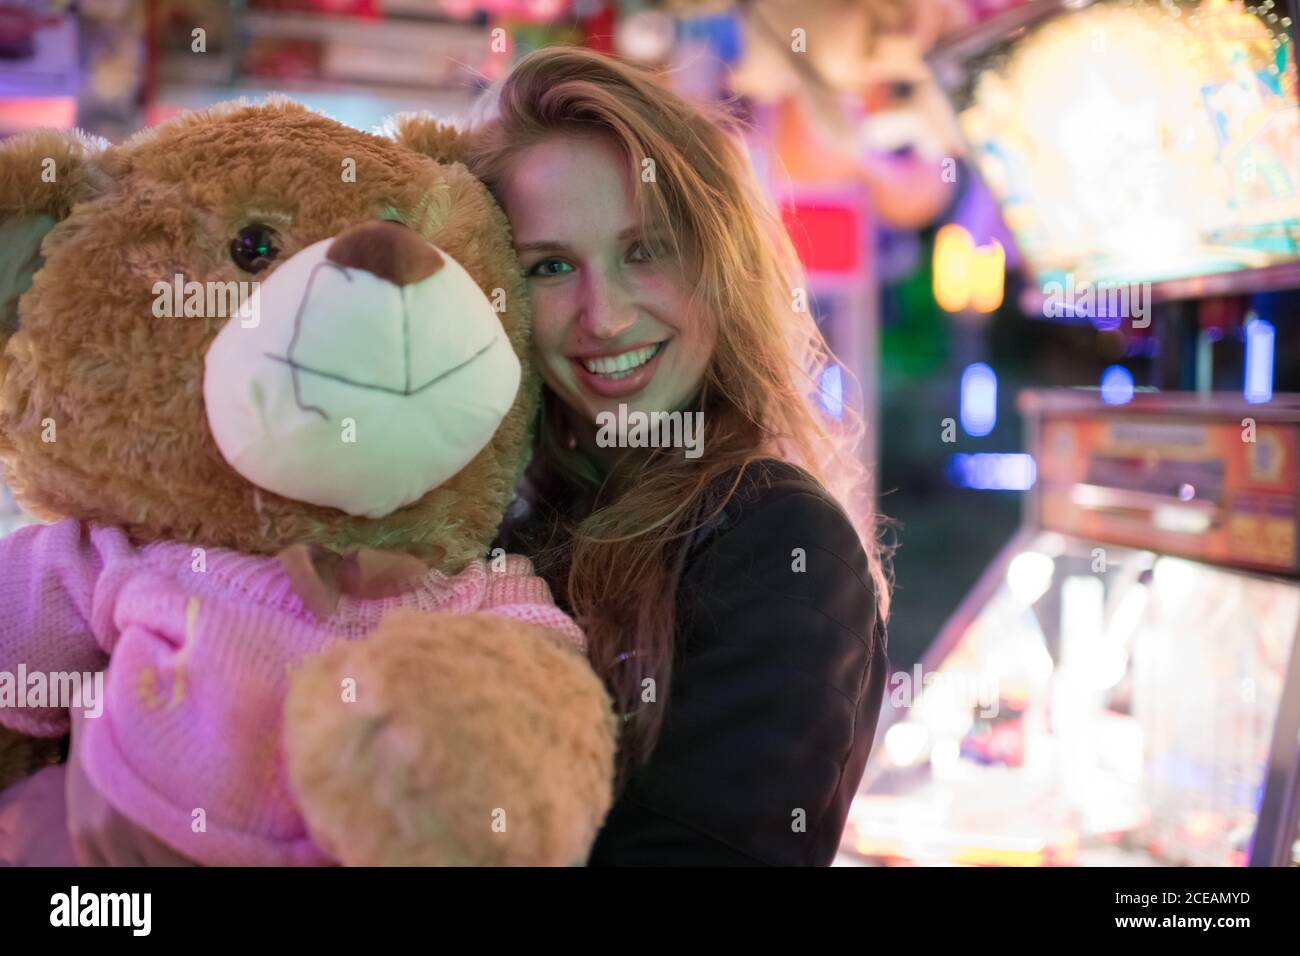 Huge Teddy Bear High Resolution Stock Photography And Images Alamy